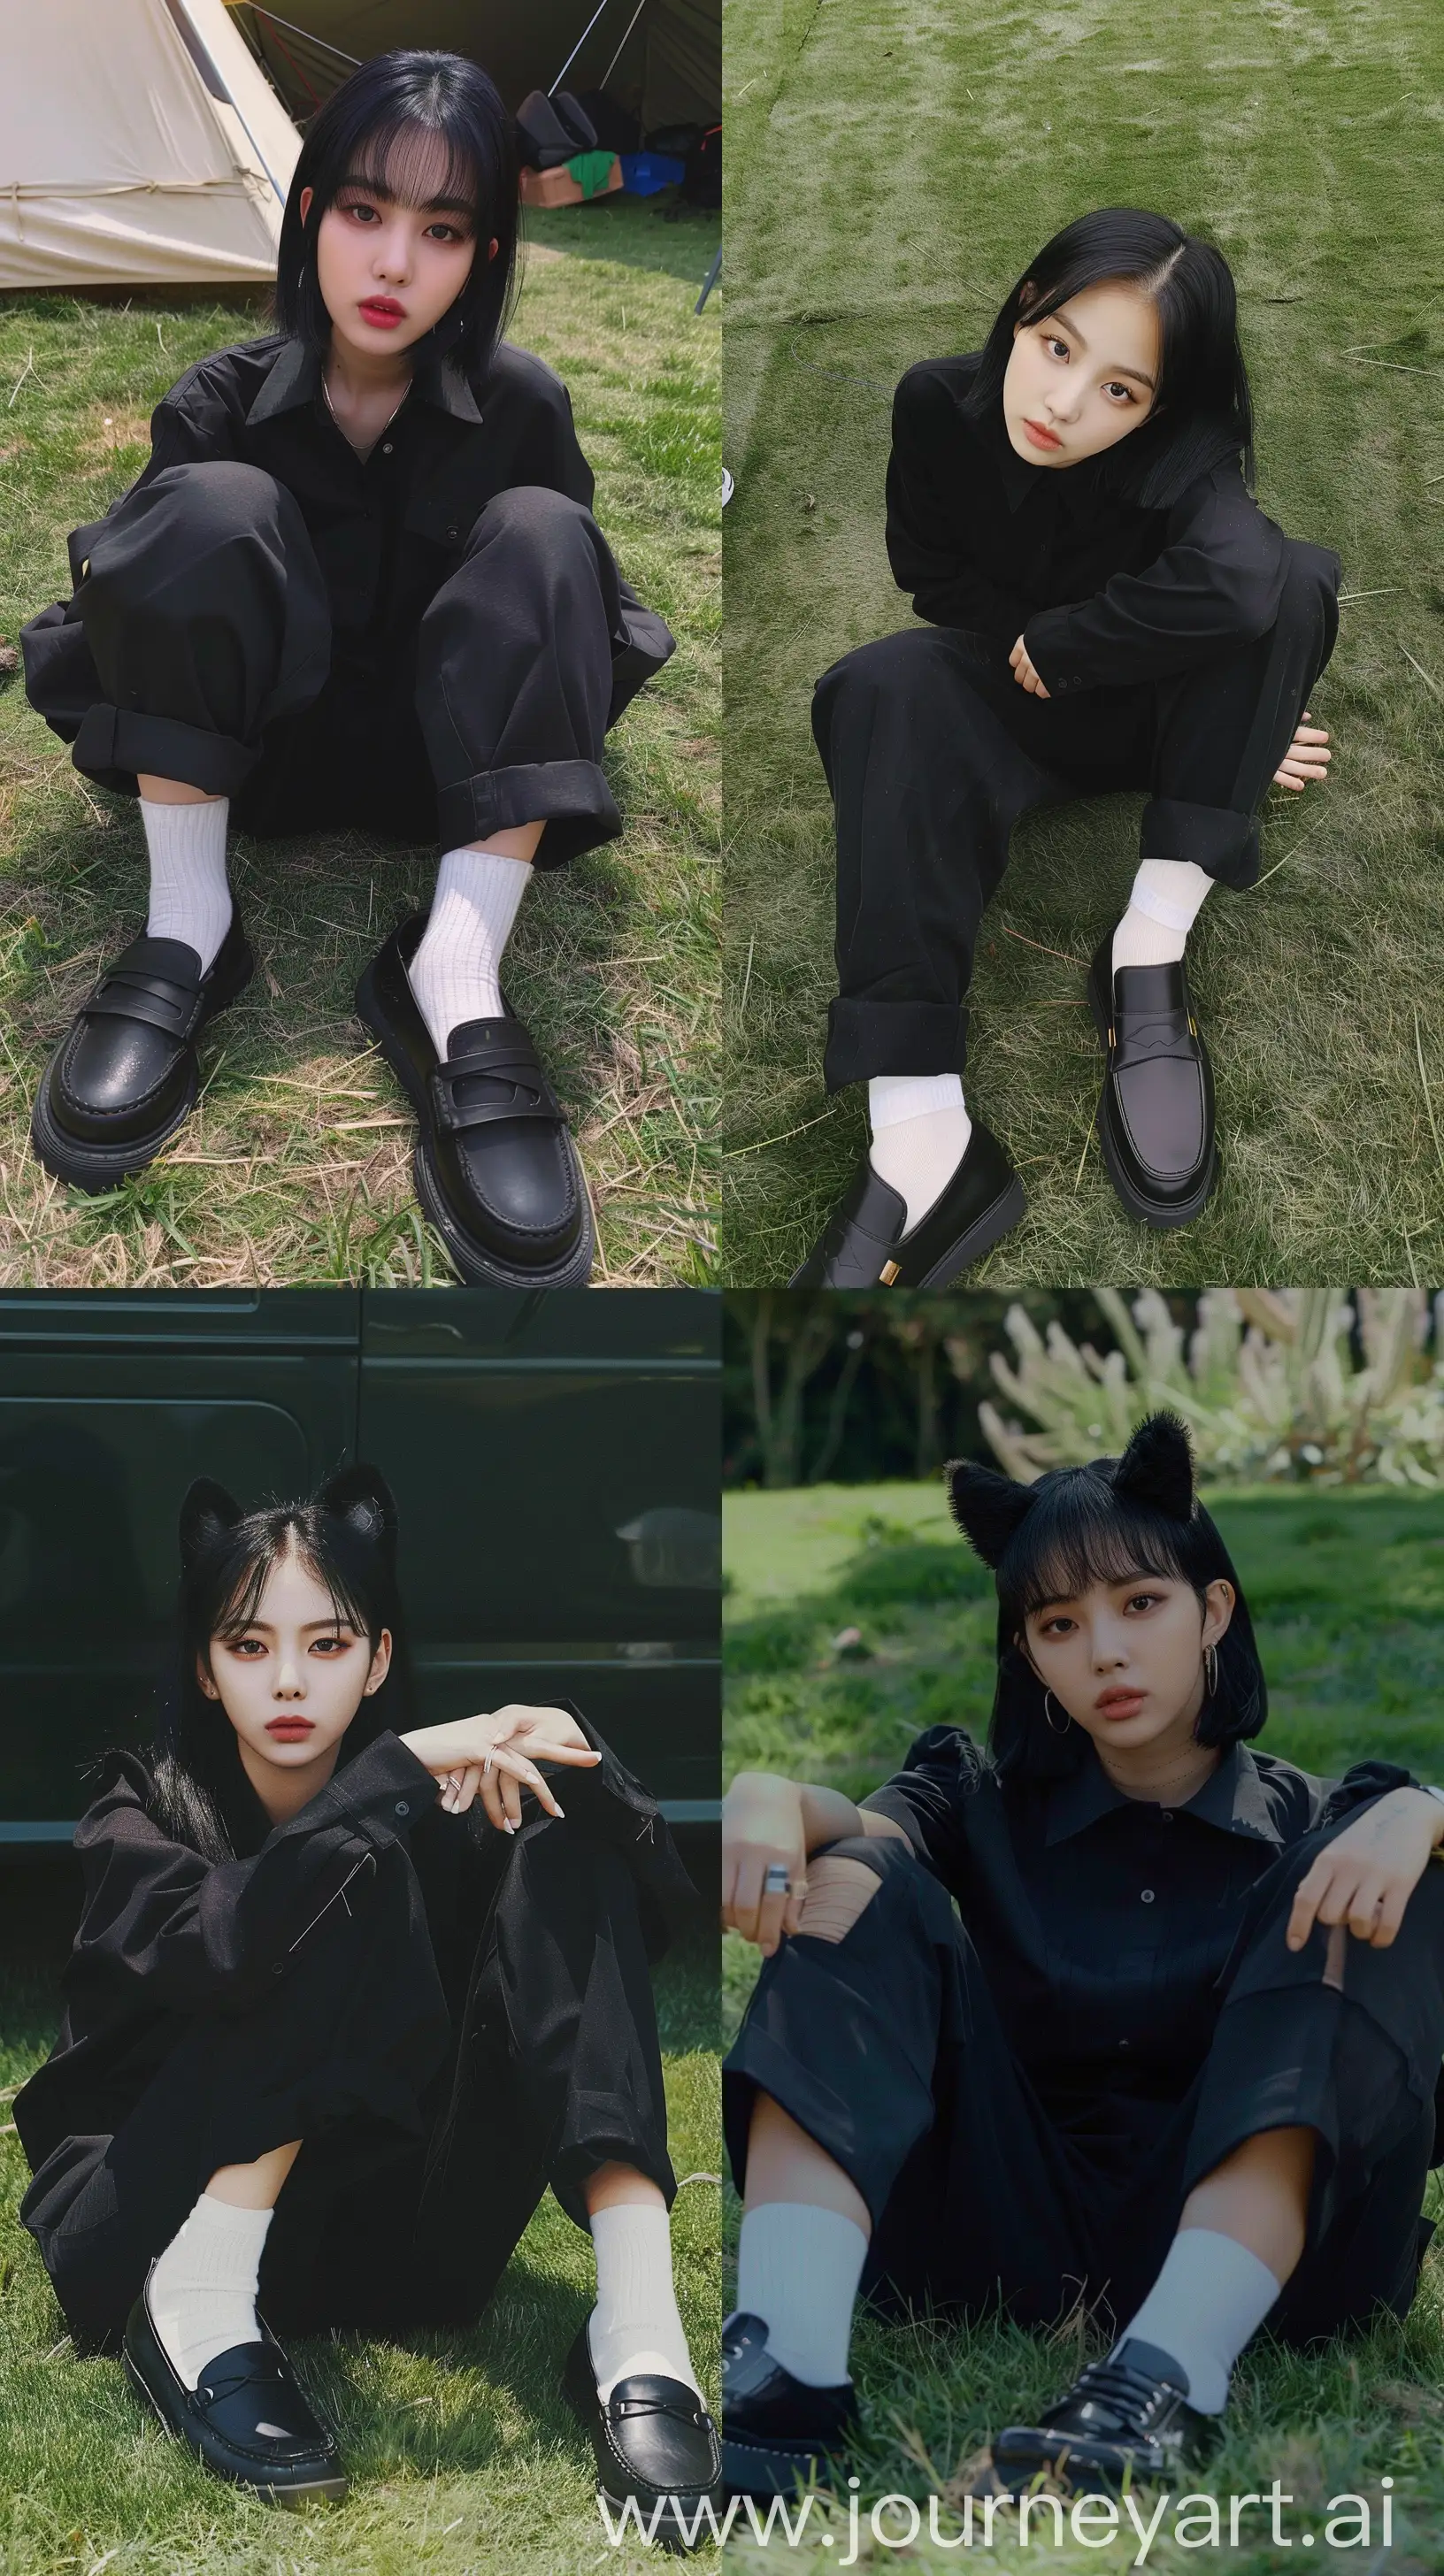 Aesthetic instagram selfie blackpink's jennie with wolf cut black hair, wide set eyes wearing black shirt and black pants with black loafers shoes, white socks, sit on grass --ar 9:16